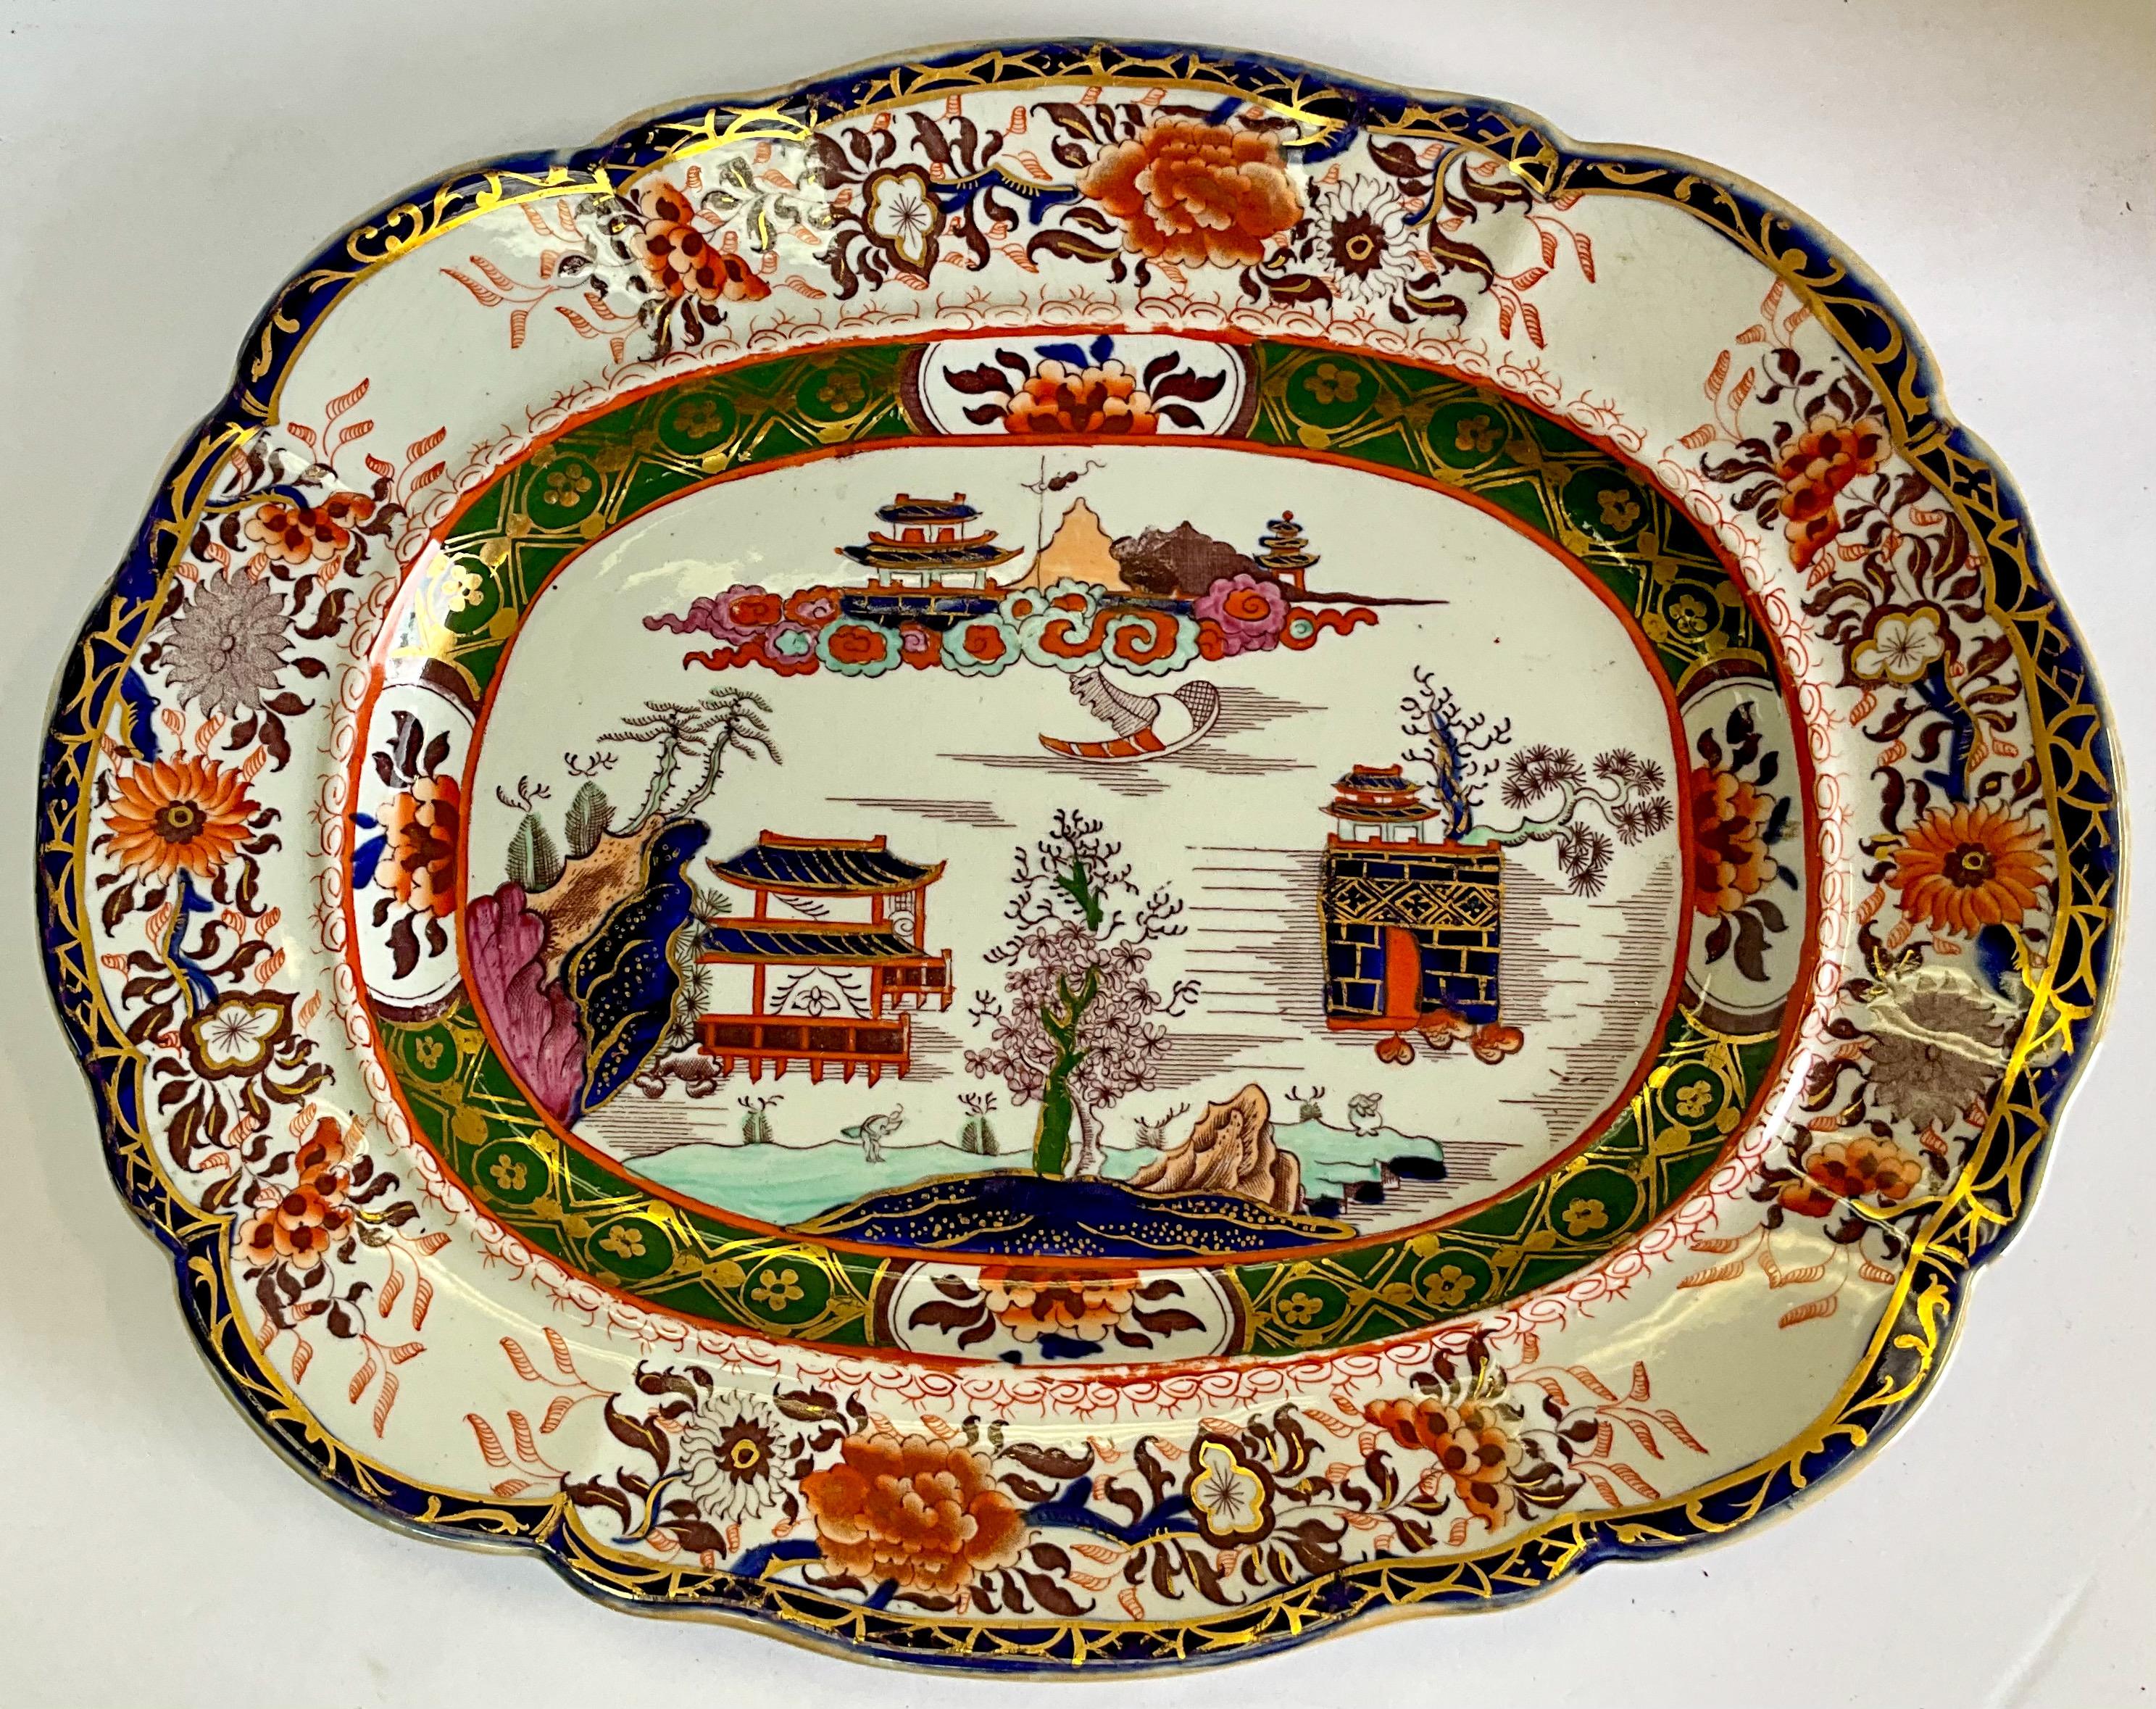 This is an early English Mason’s Ironstone platter. It has Imari coloration chinoiserie inspired themes throughout. It is marked. There are two available. 

Please note the turquoise on one is slightly lighter than the other.